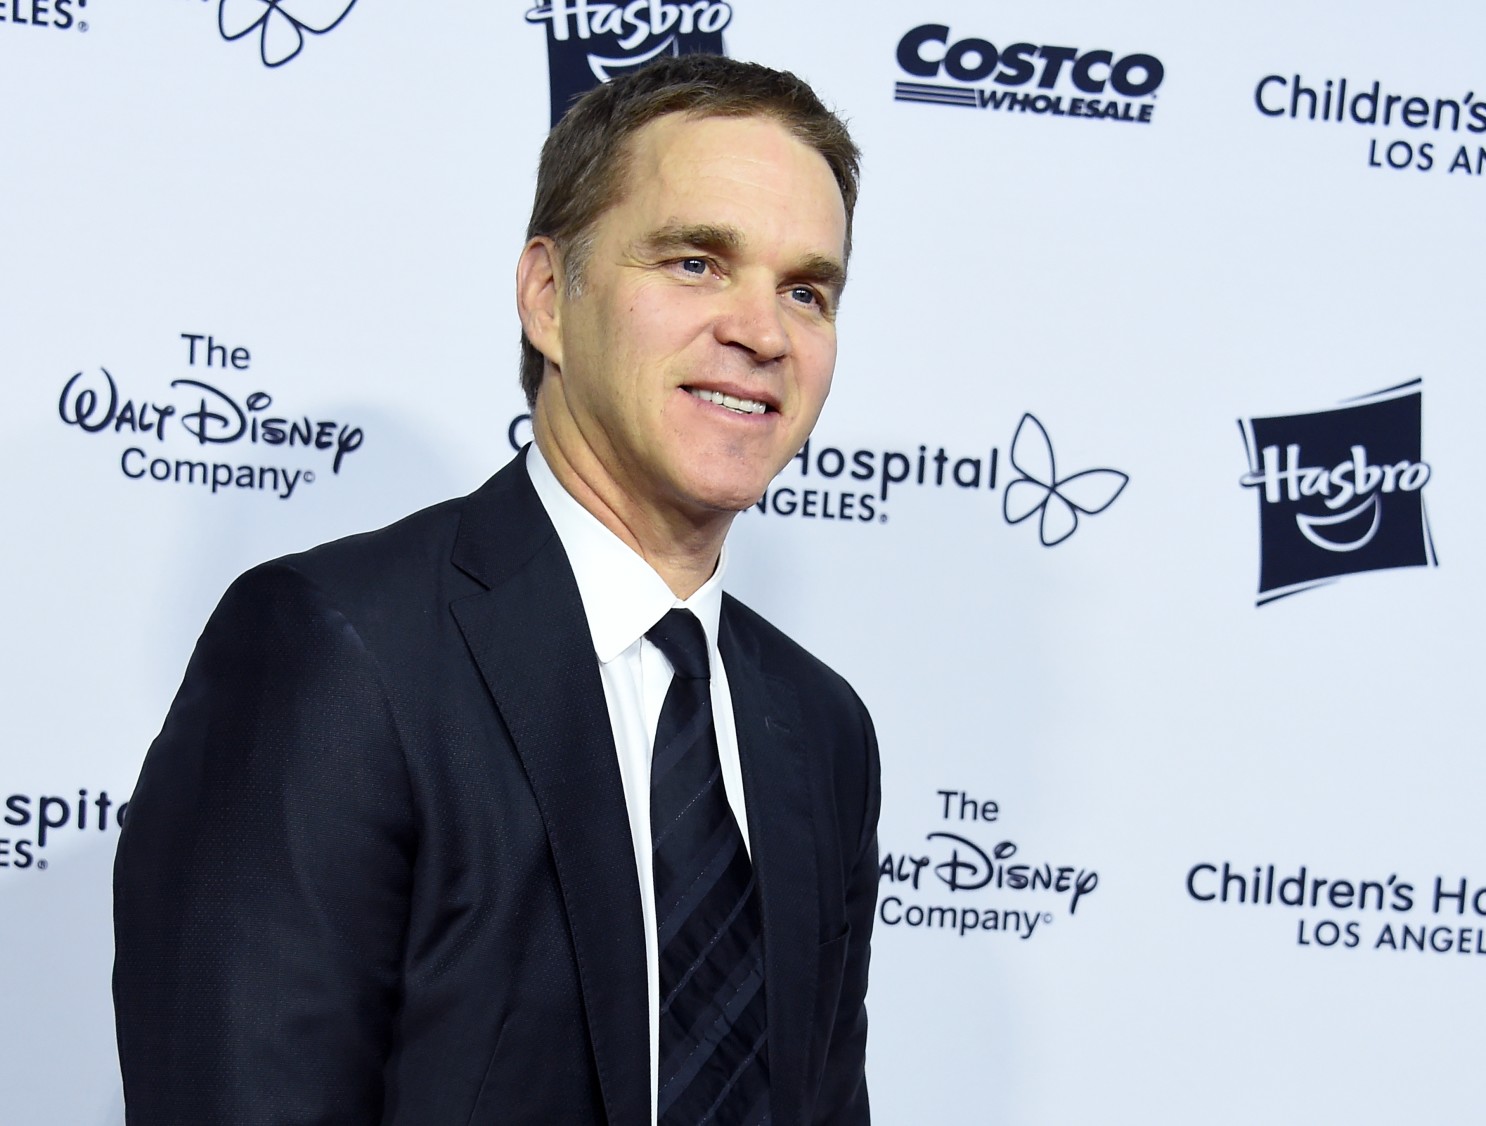 20 Questions with #20 - Interview with Luc Robitaille